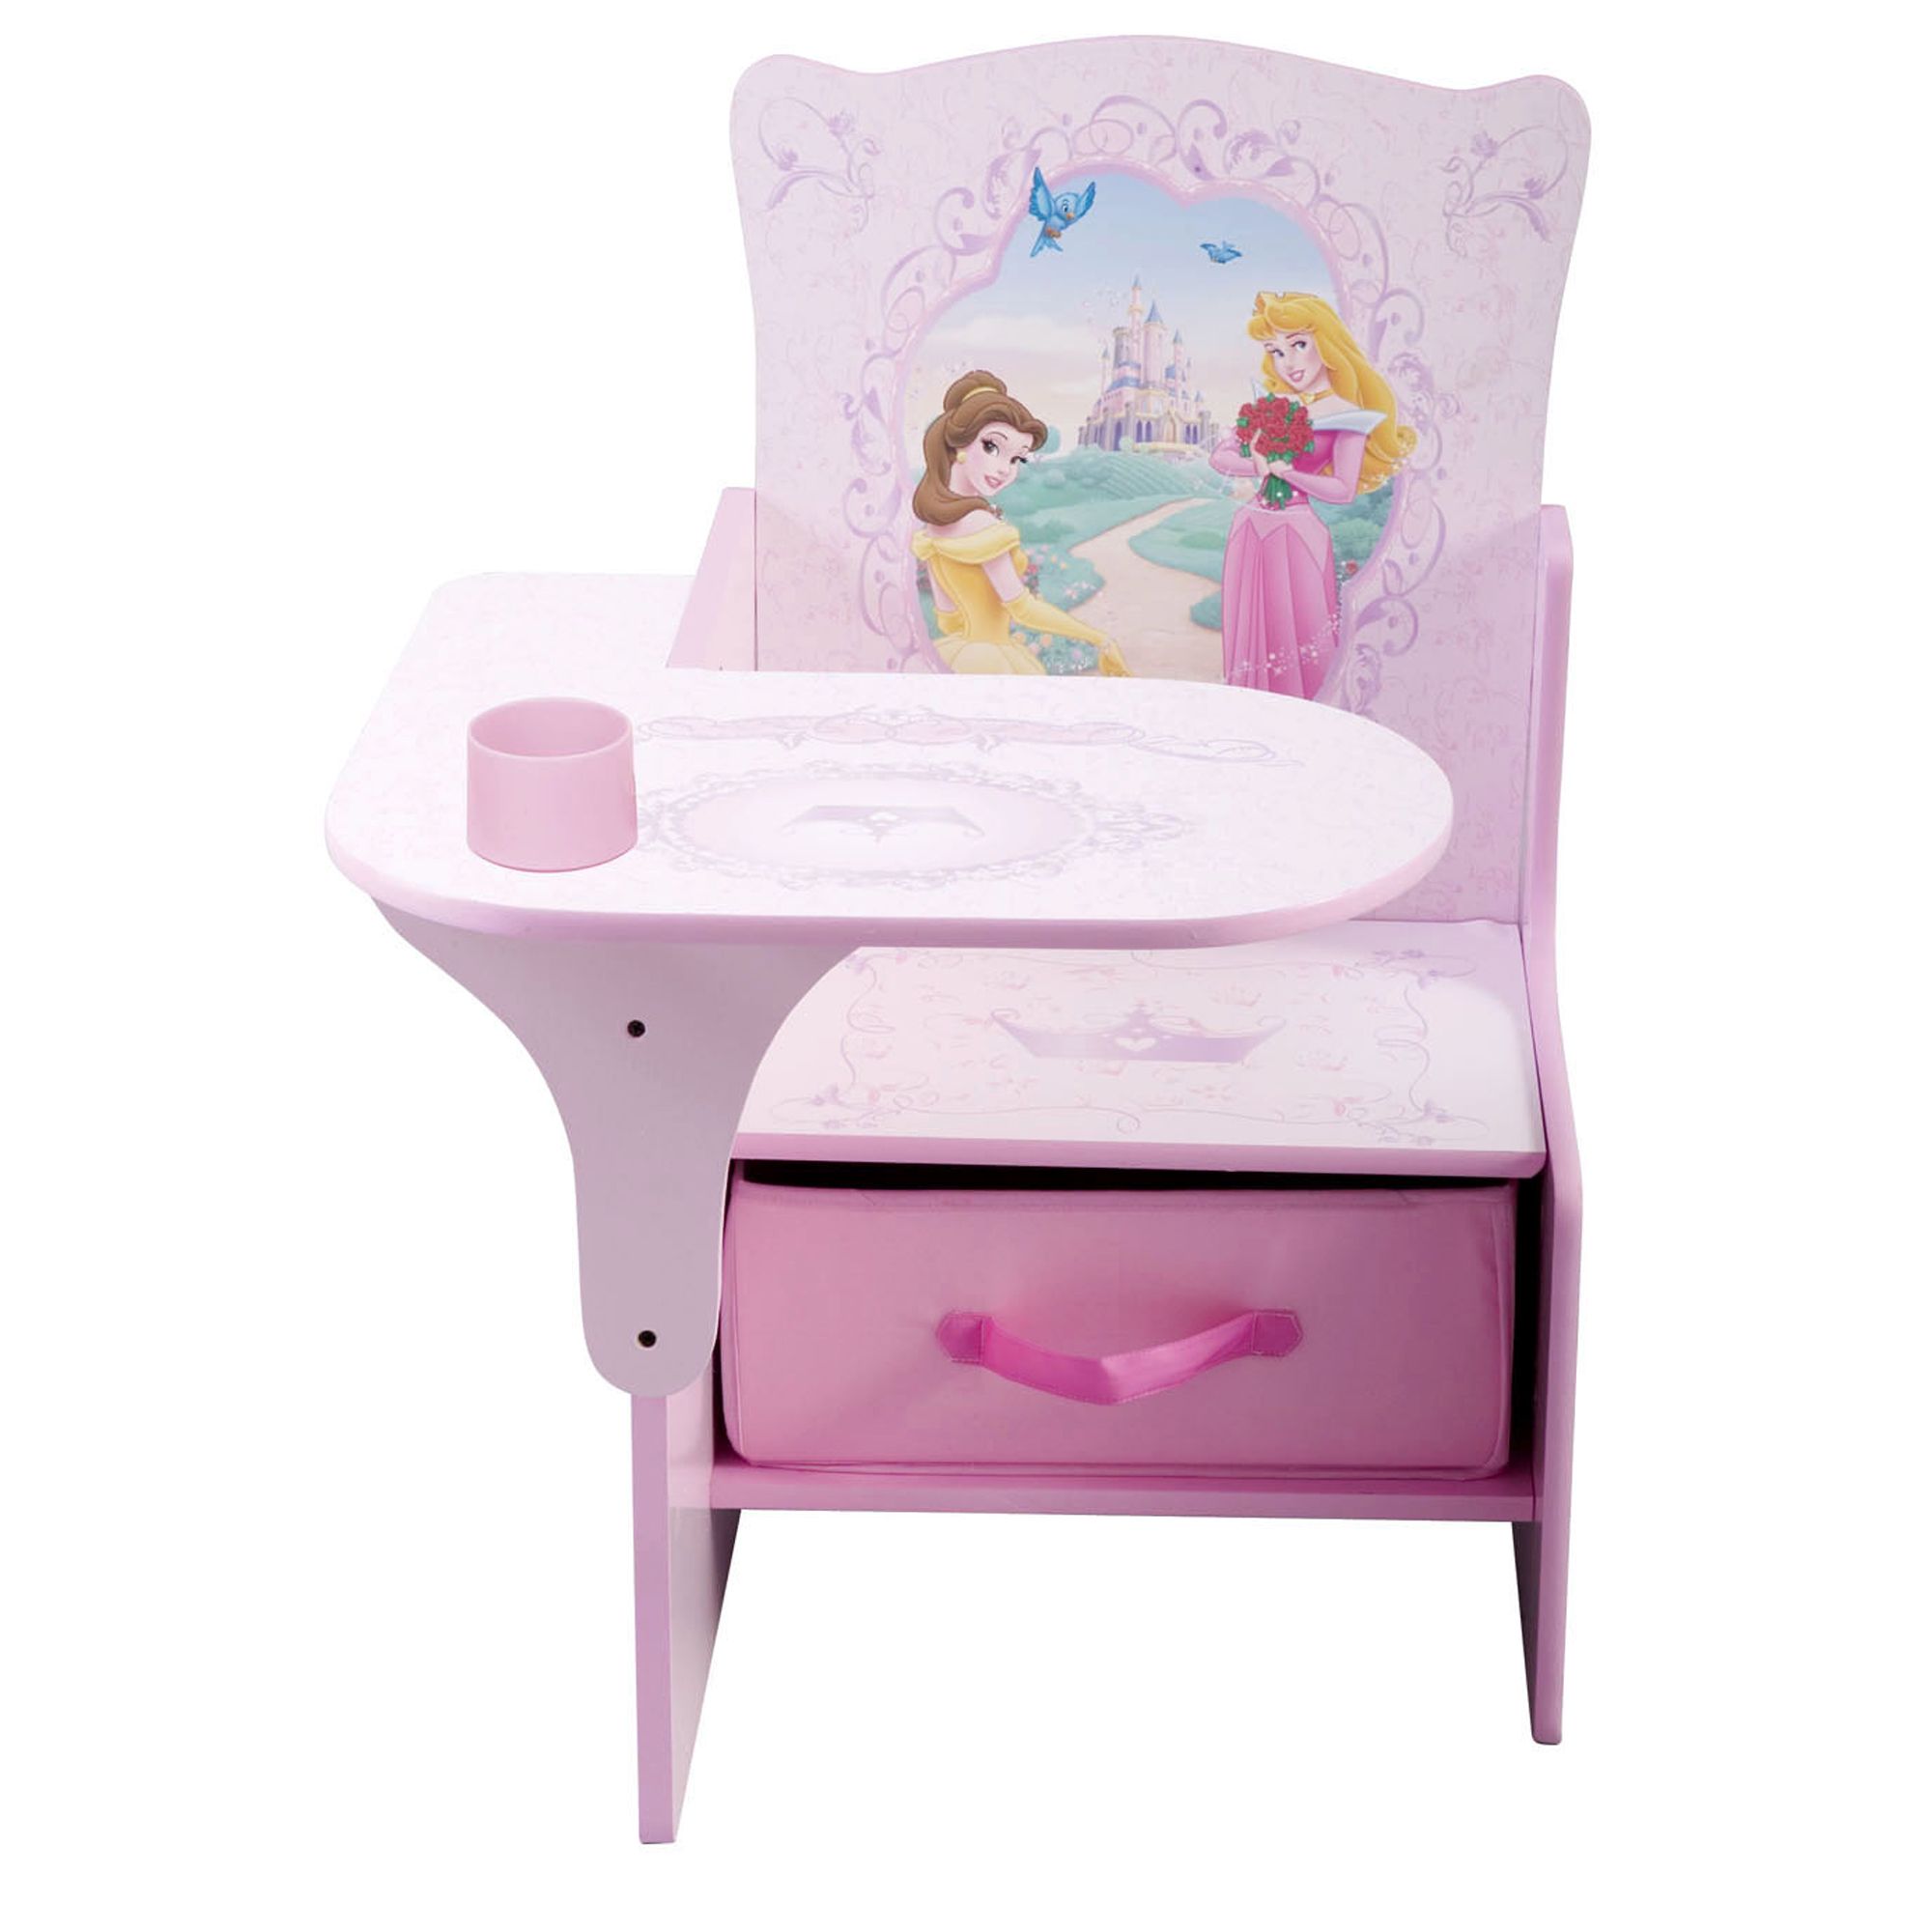 Disney Princess Chair Desk with Pull out under the Seat